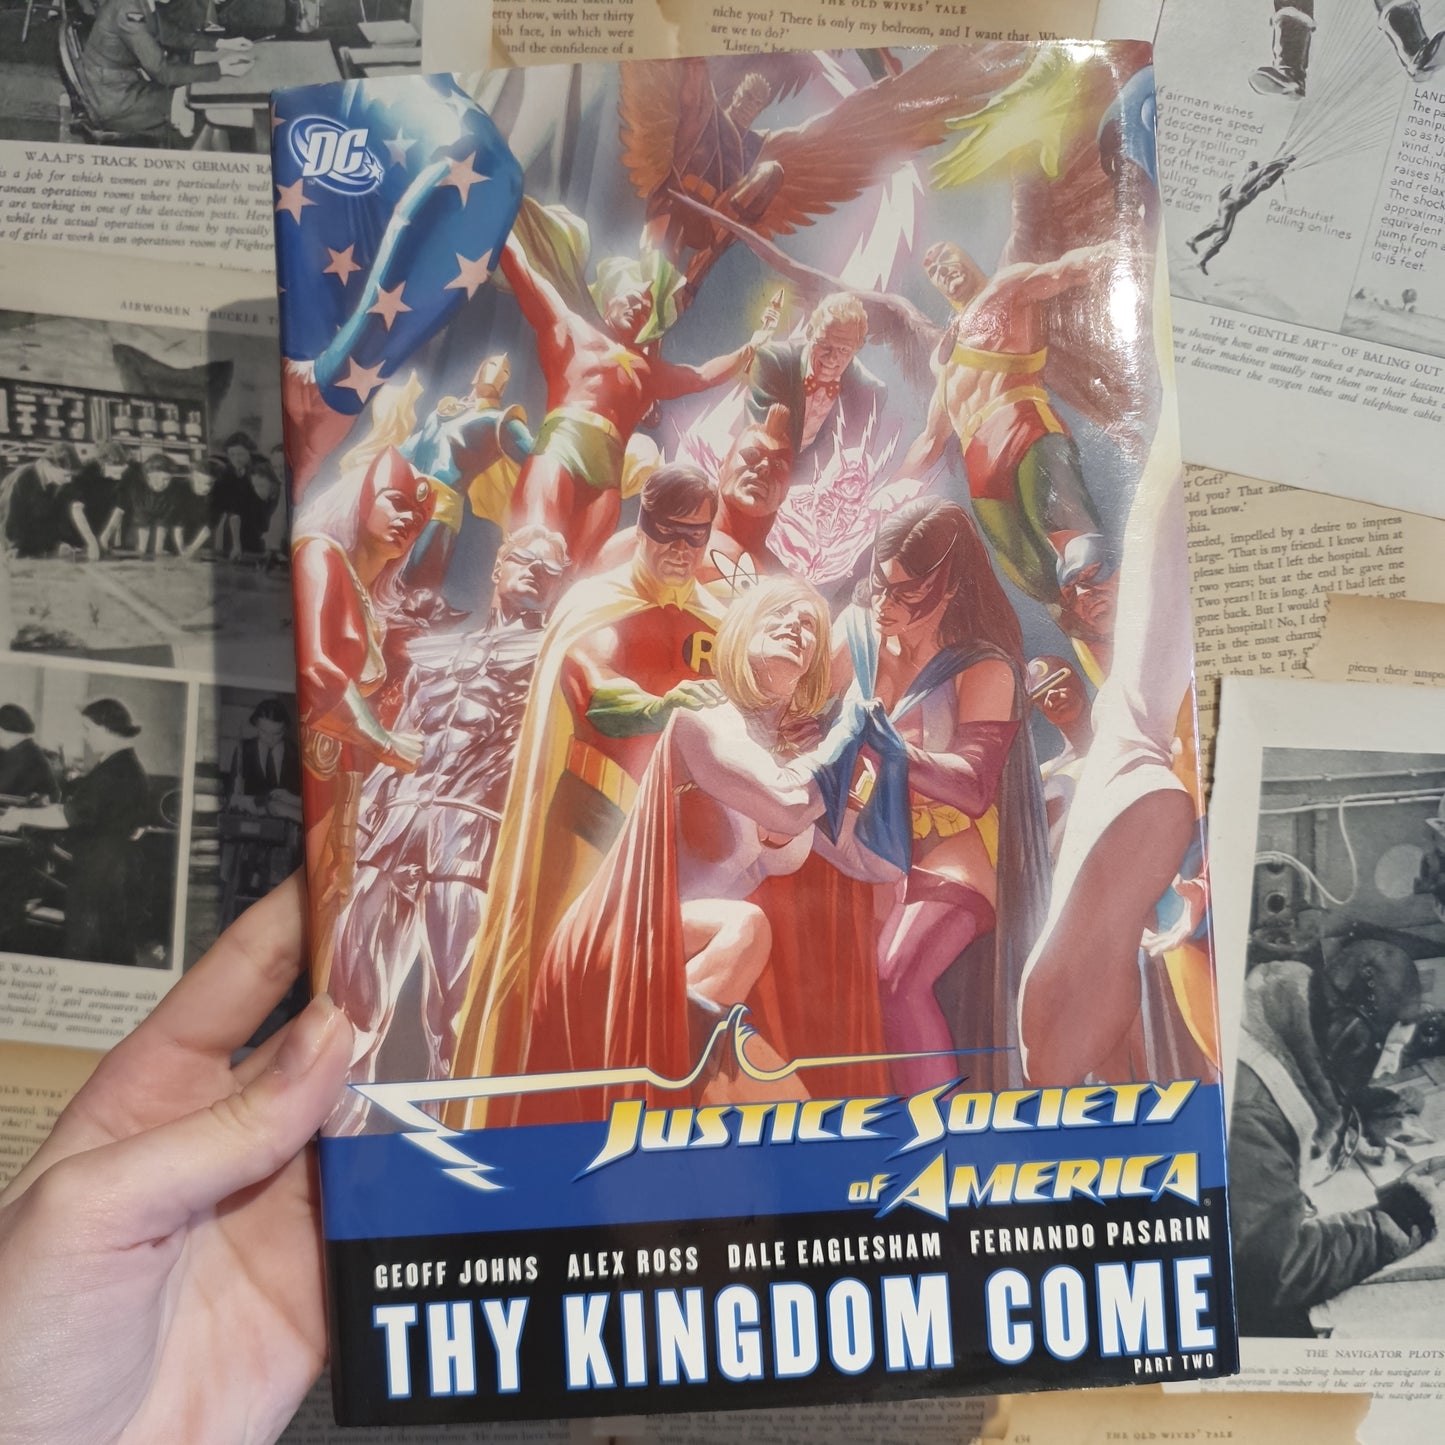 Justice Society of America: Thy Kingdom Come Part Two by Johns, Ross... (2008)